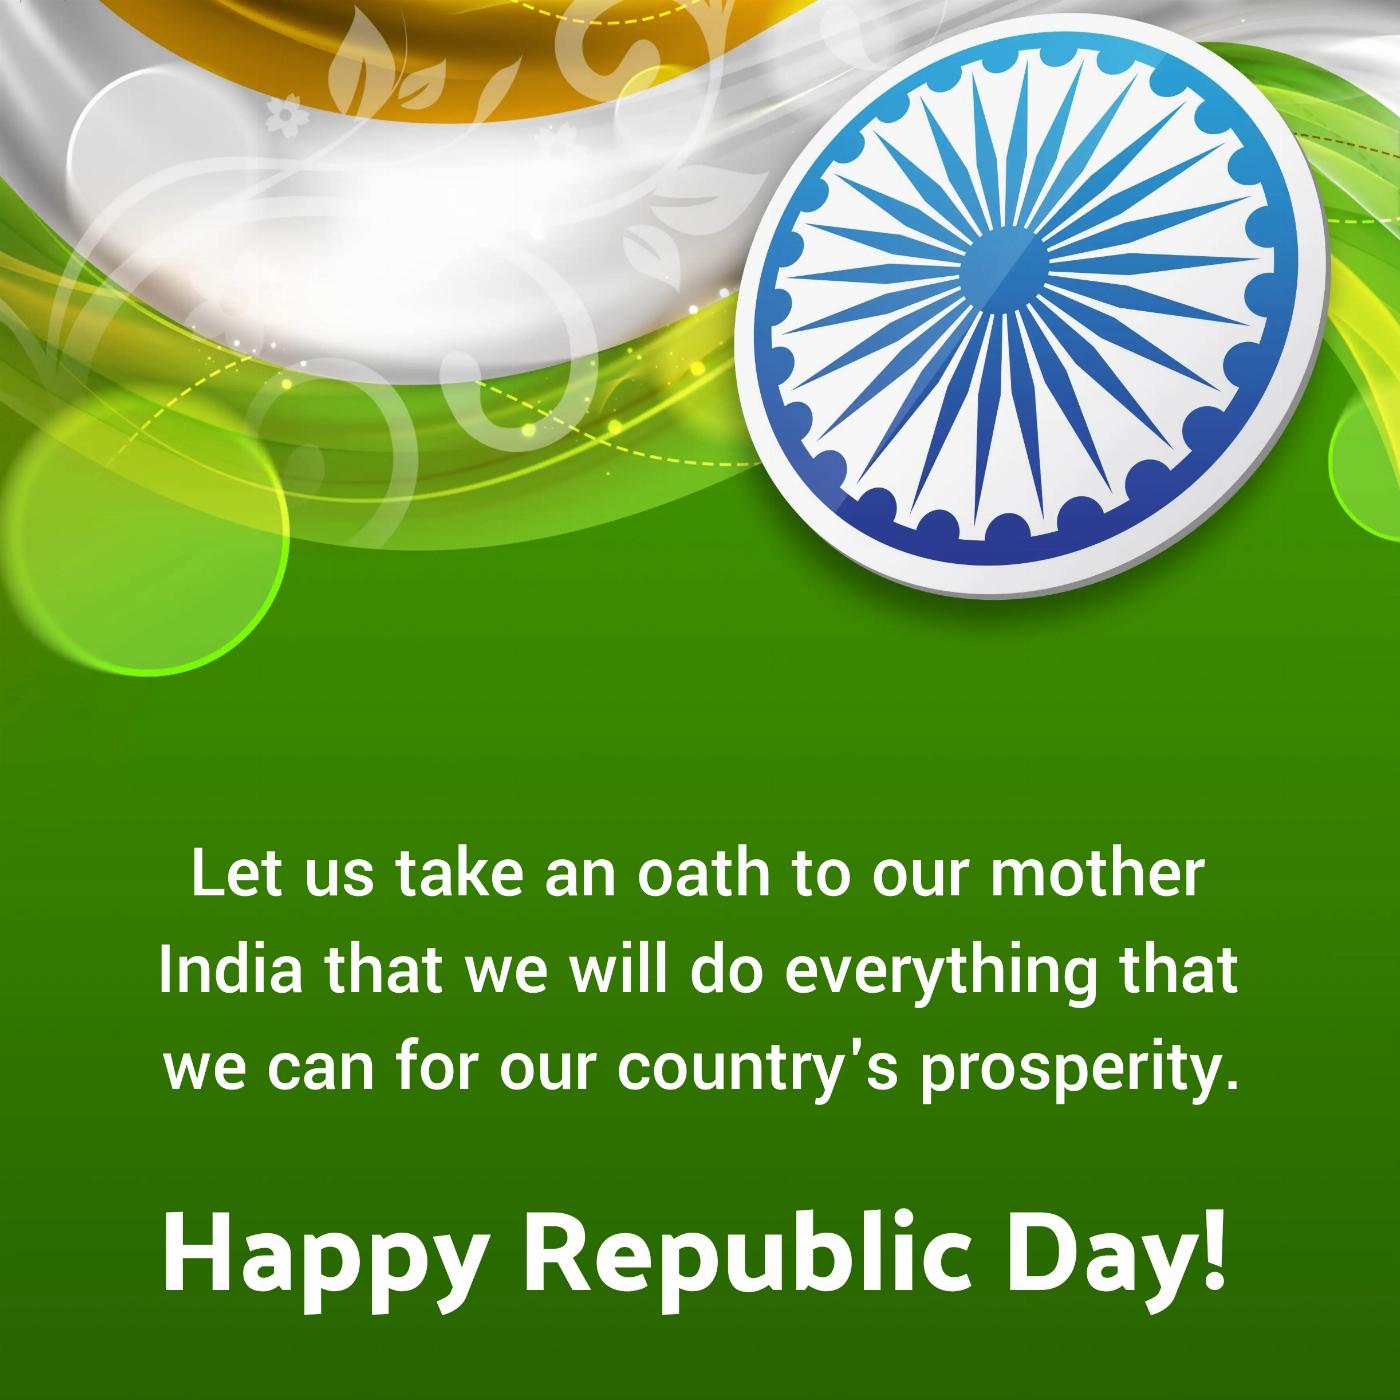 Let us take an oath to our mother India